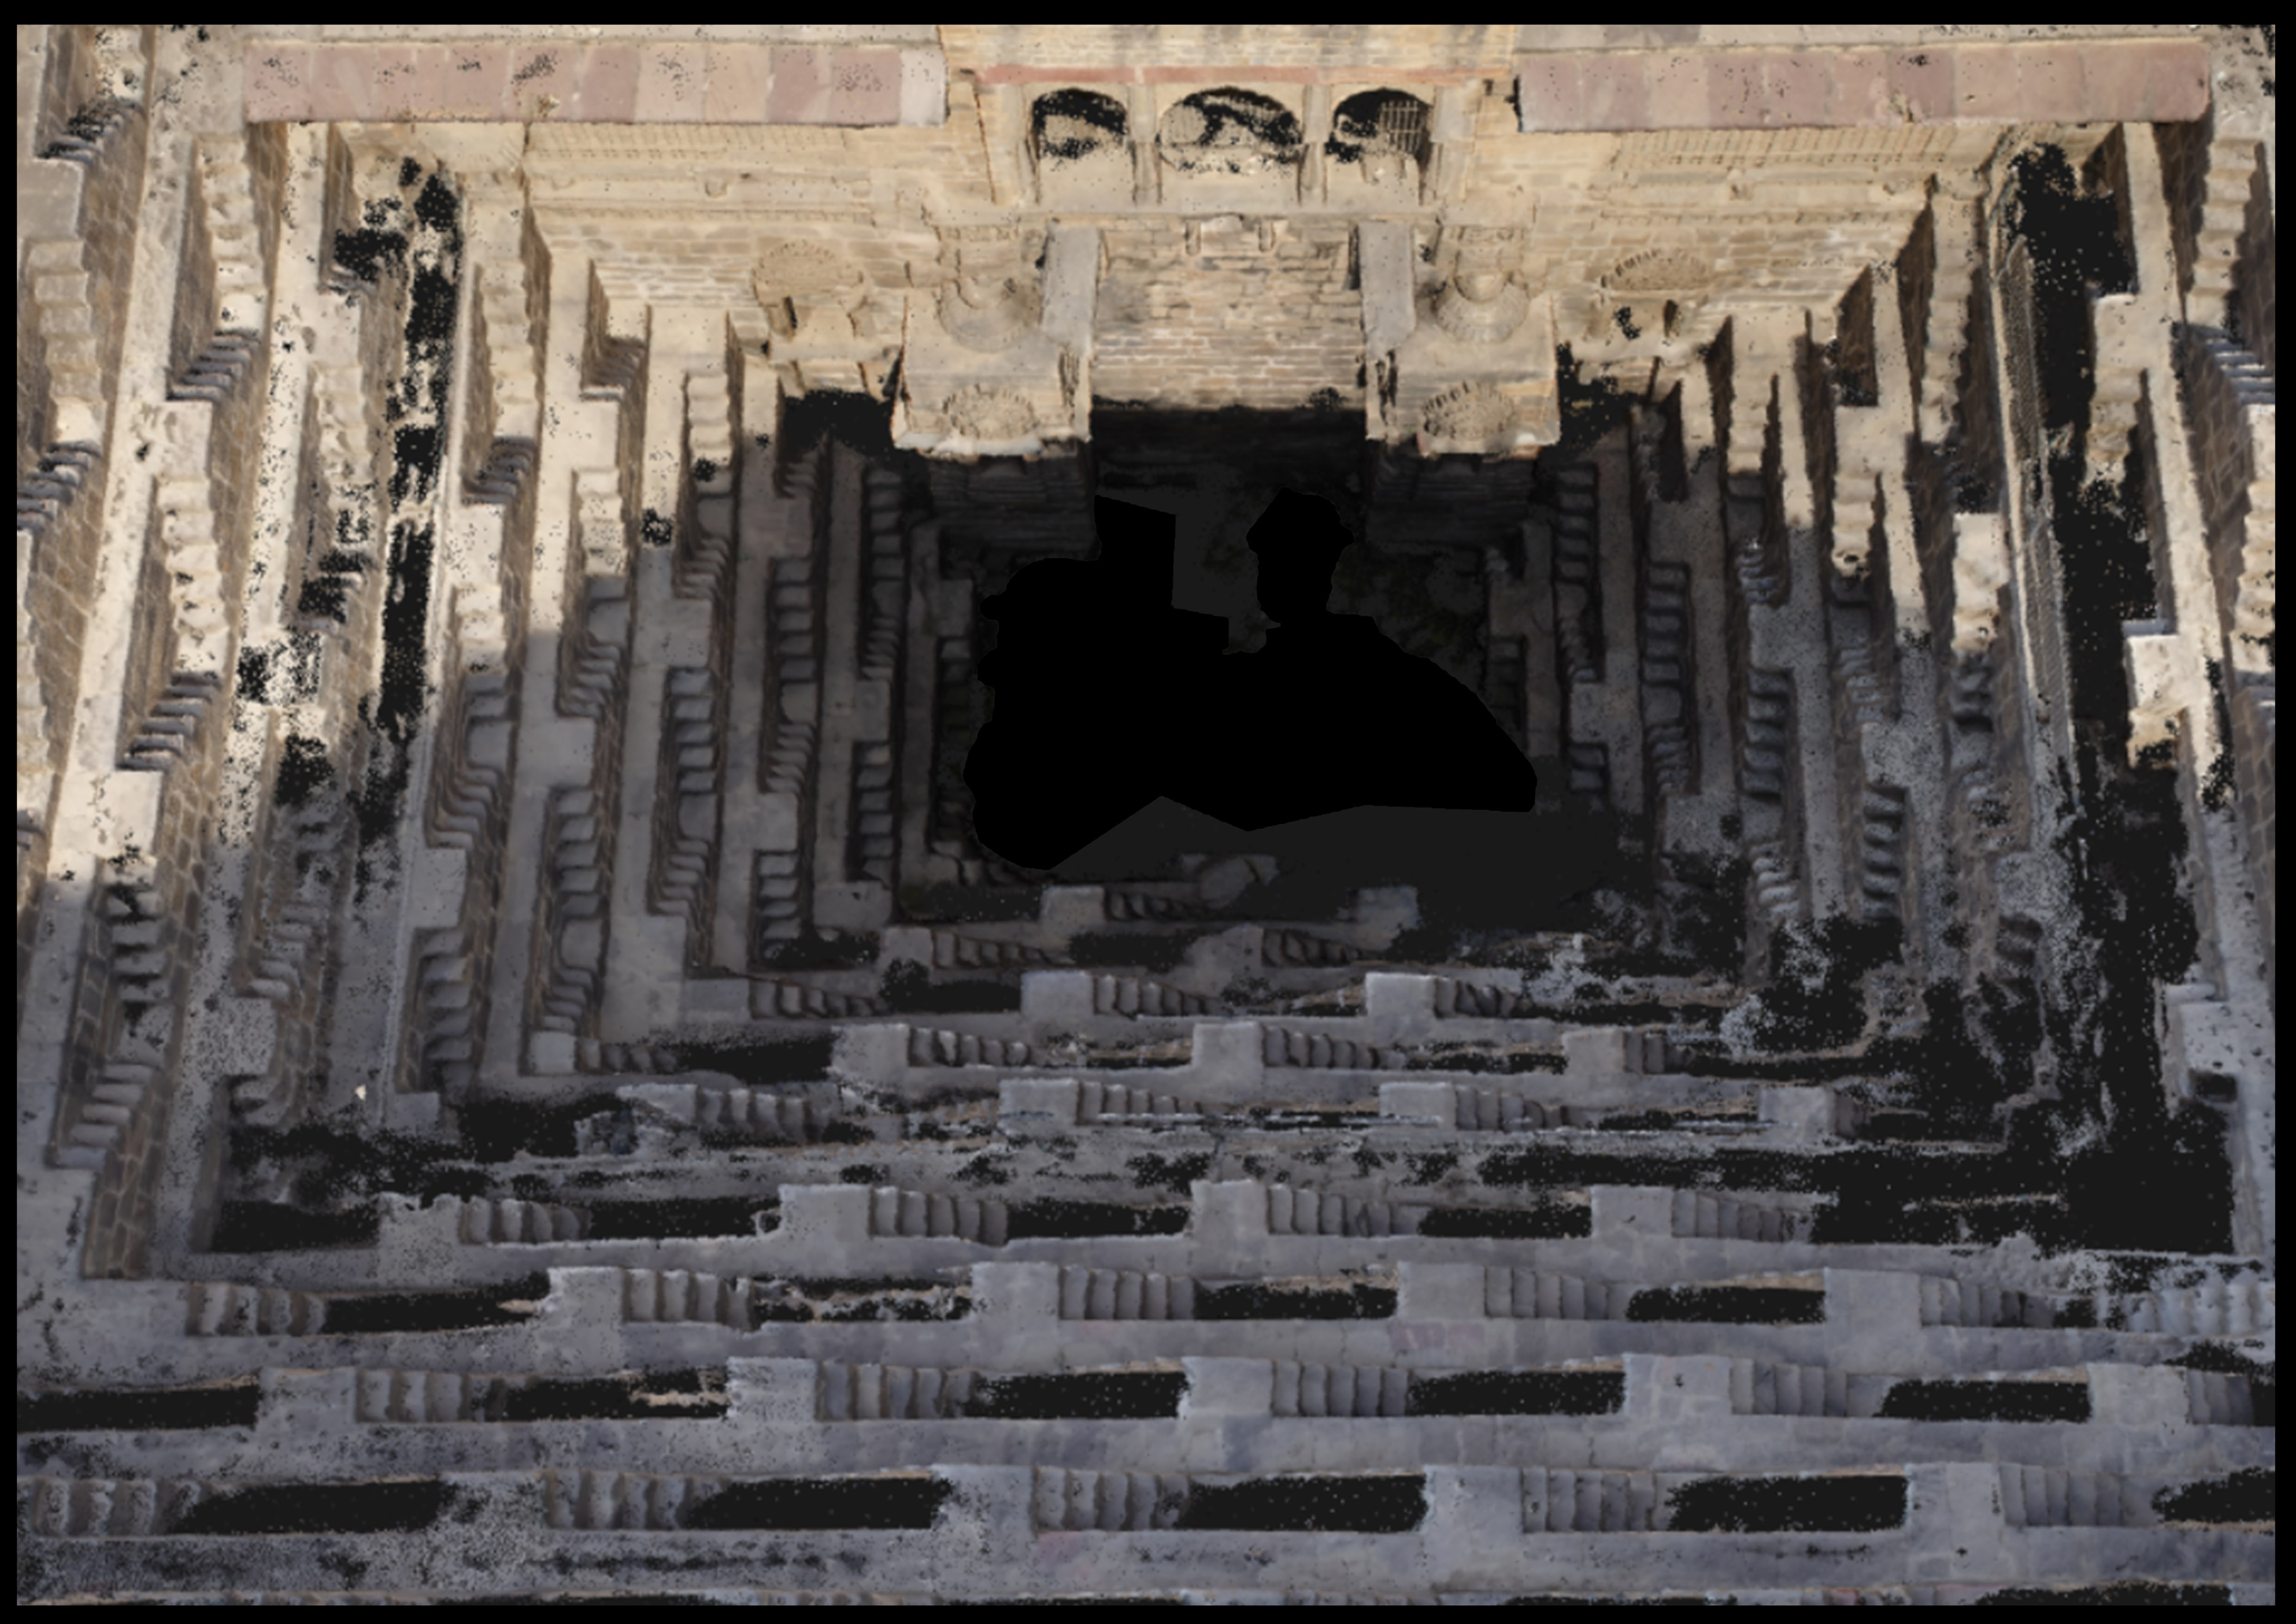 Digital Futures, Inclusive Futures 2021 Pablo Lorenzo-Eiroa Workshop Student: Pattnaik Ayush Name – Chand Baori is a stepwell situated in the village of Abhaneri in the Indian state of Rajasthan. Abhaneri, Bandikui, Rajasthan 303313